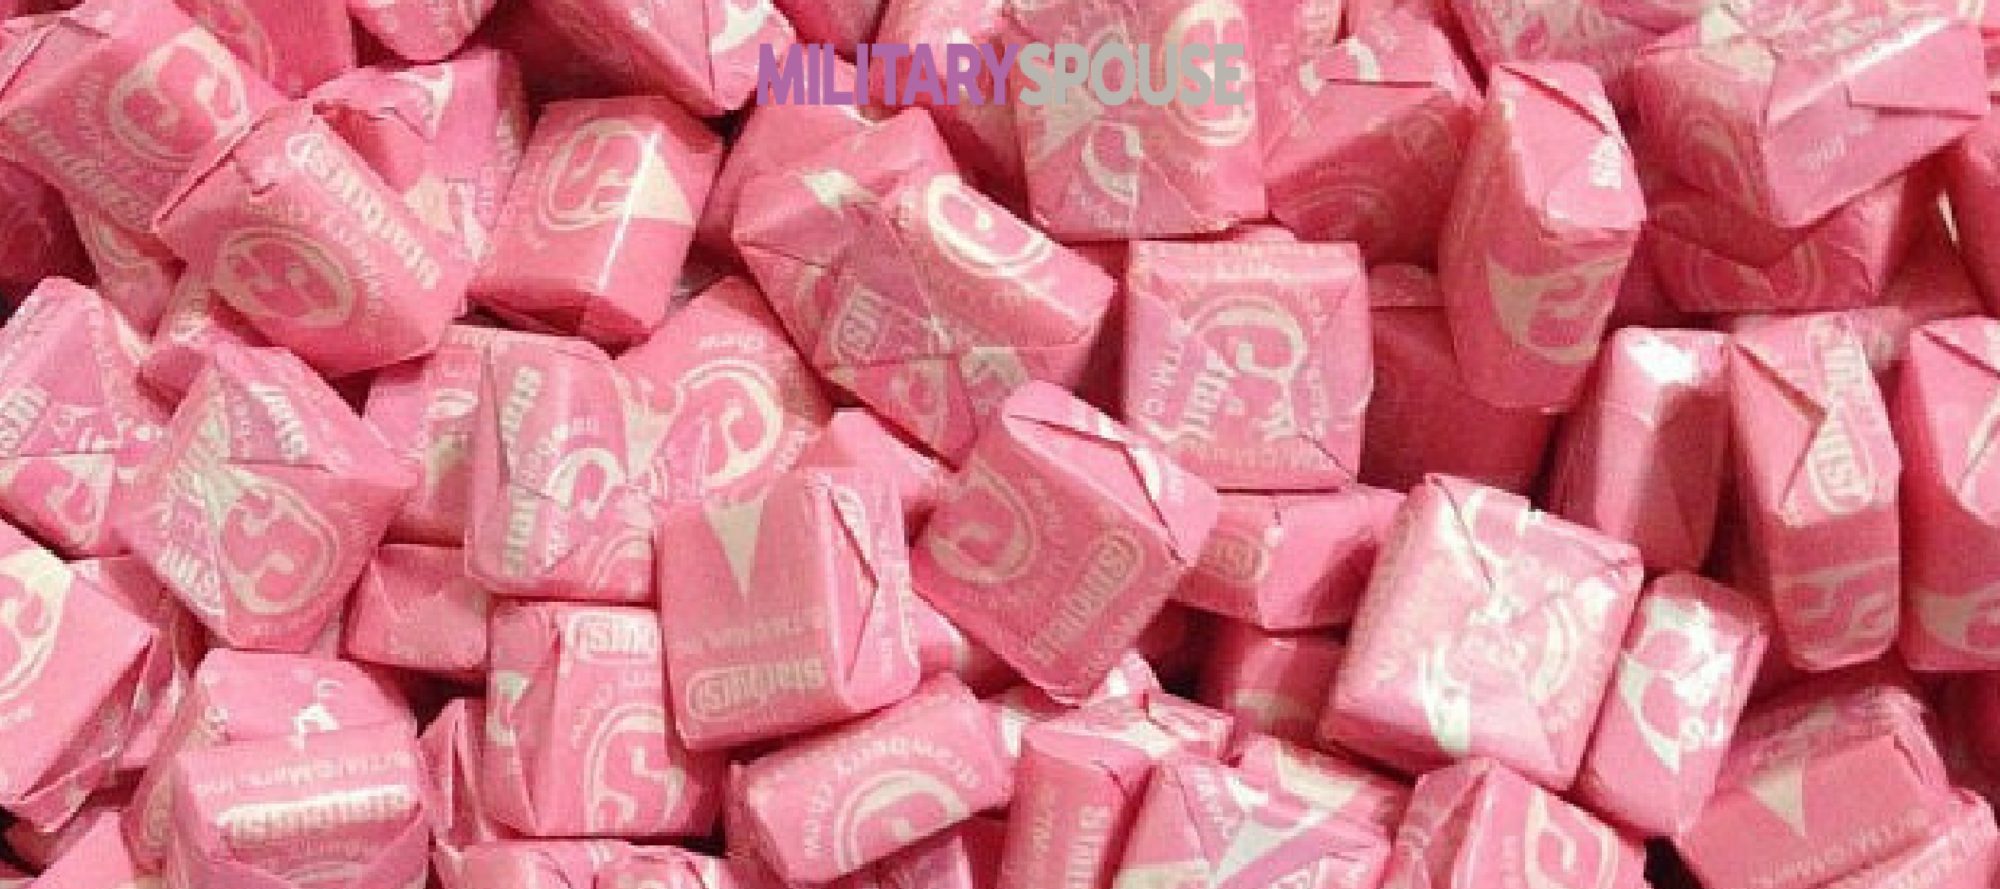 All Pink Starburst Packs Are Now A Thing